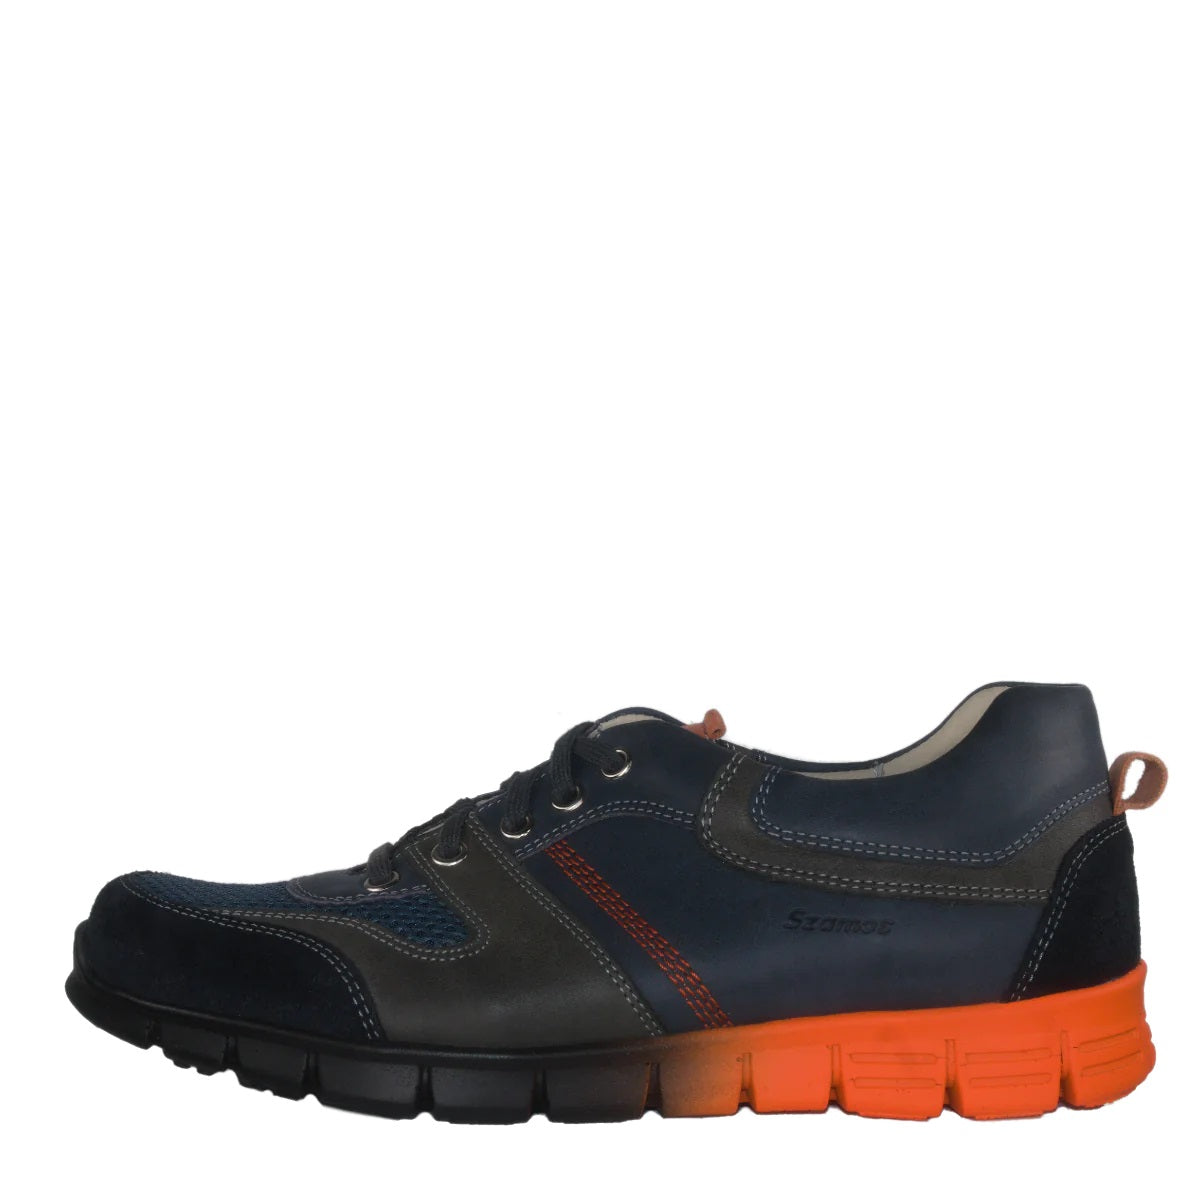 Szamos kid boy sneakers in blue and grey color with orange detail and laces big kid size - TinyShoes